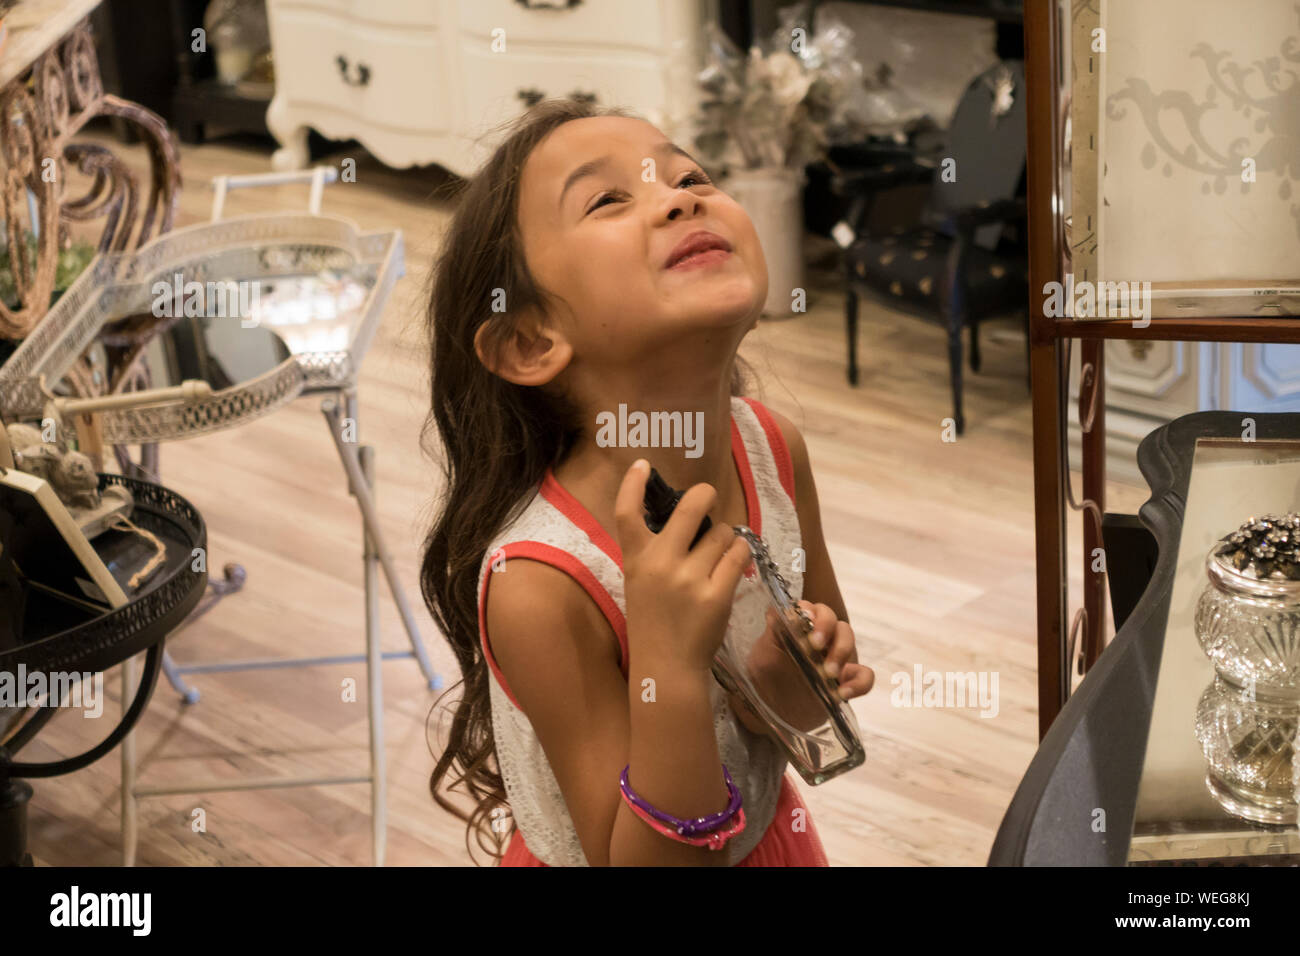 6-7 year old mixed ethnicity Asian girl applying perfume in an antique shop, San Jose, California Stock Photo